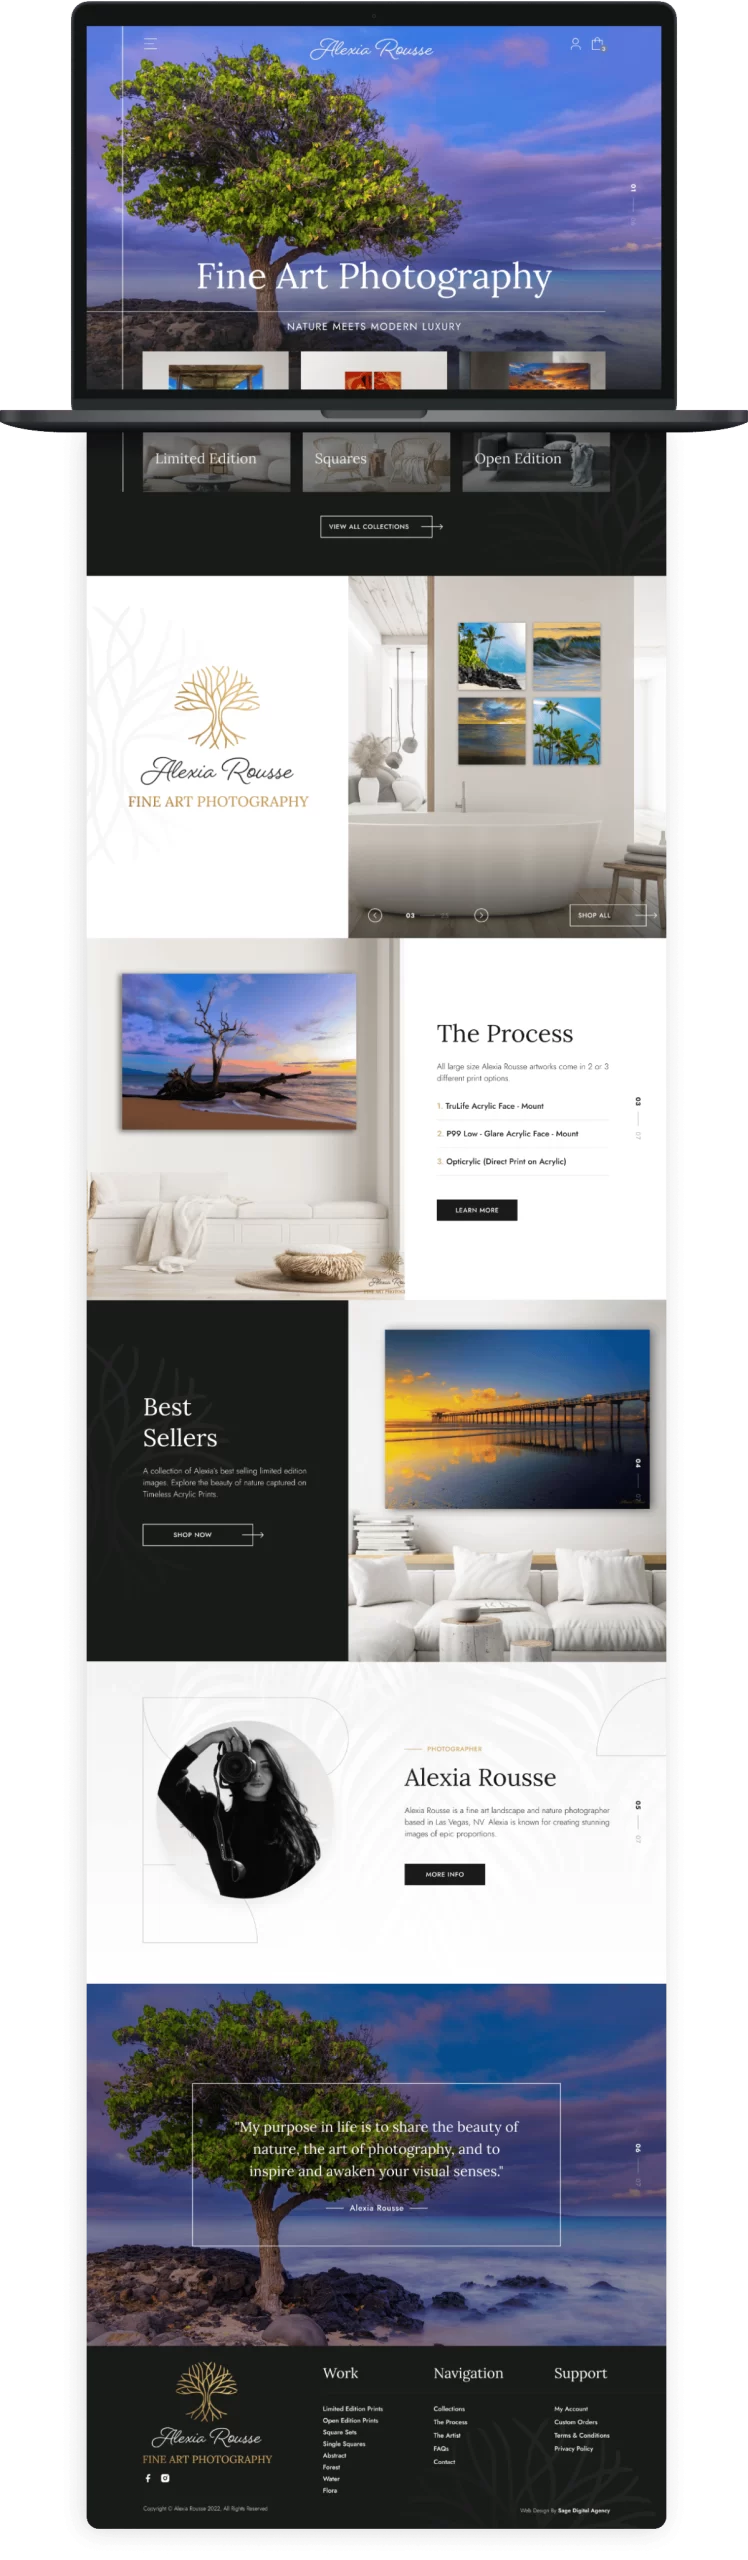 Alexia Rousse Photography website design page mockup